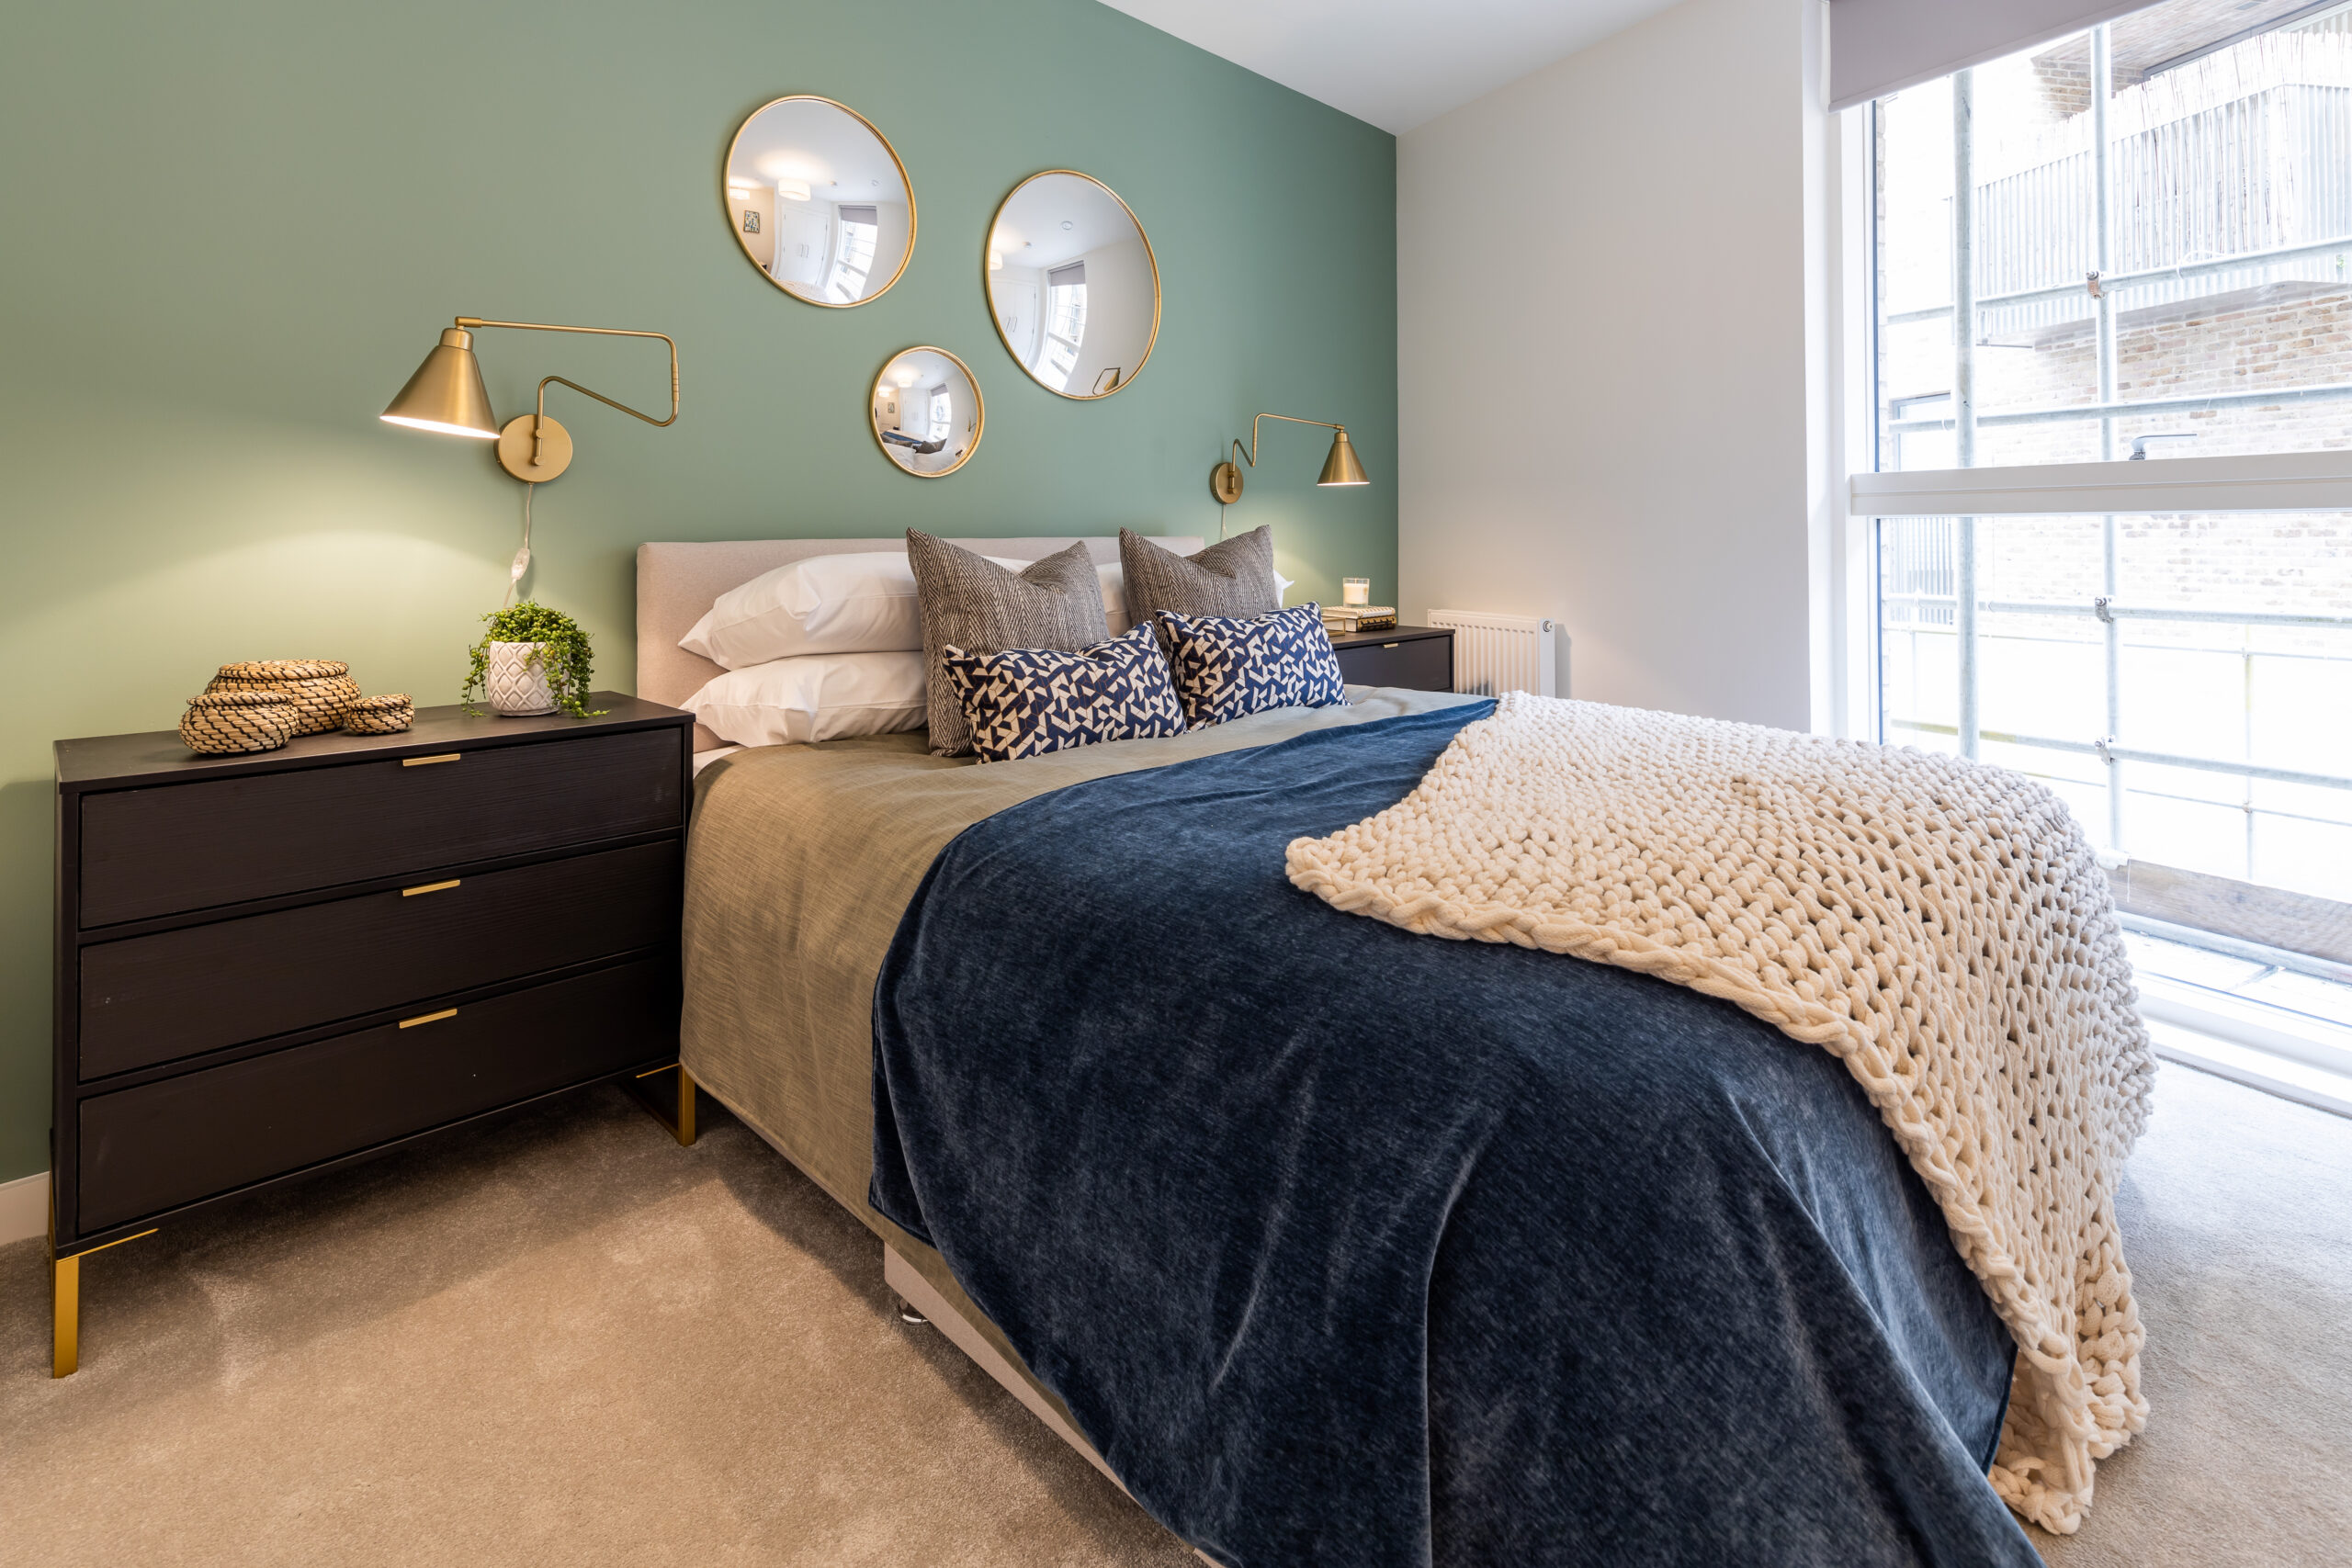 Bedroom1-The-Moorings-Hounslow-Brentford-Shared-Ownership-2021-Legal-And-General-Affordable-Homes